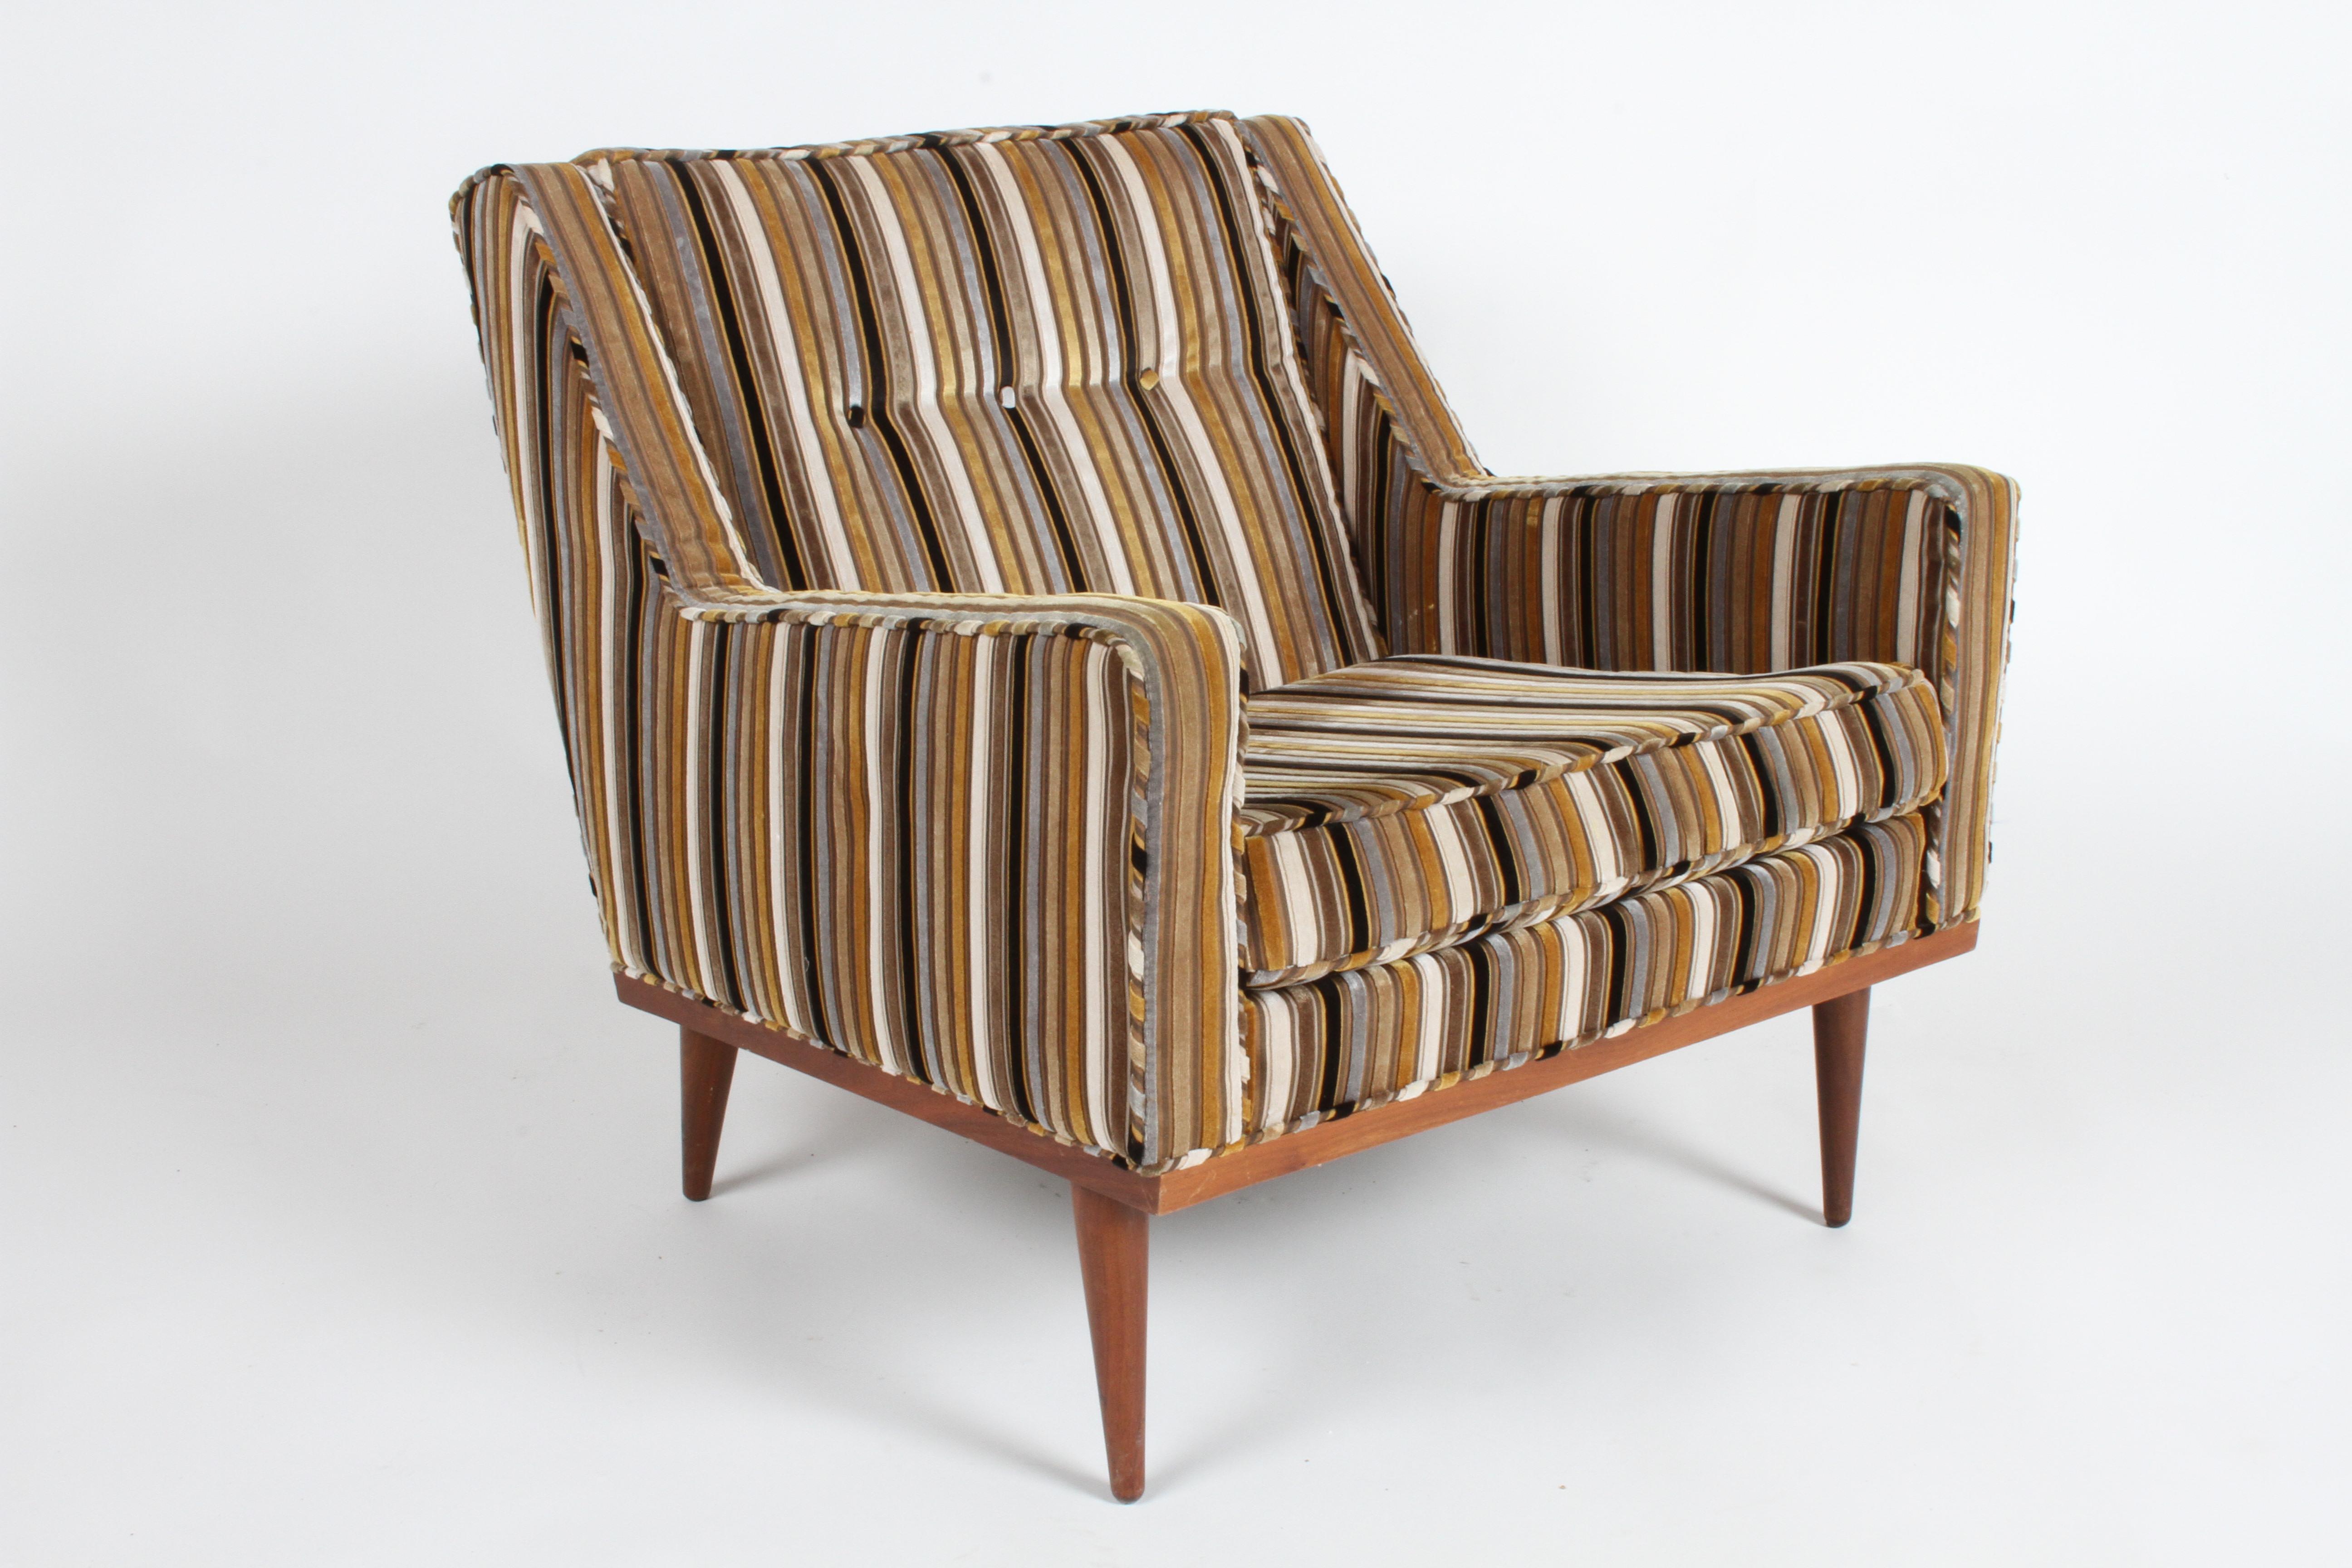 Milo Baughman for James Inc. low back lounge chair, part of his articulate seating collection with classic Mid-Century lines. This chair has its original wide velvet stripe upholstery and walnut finished frame. Upholstery is in surprisingly good